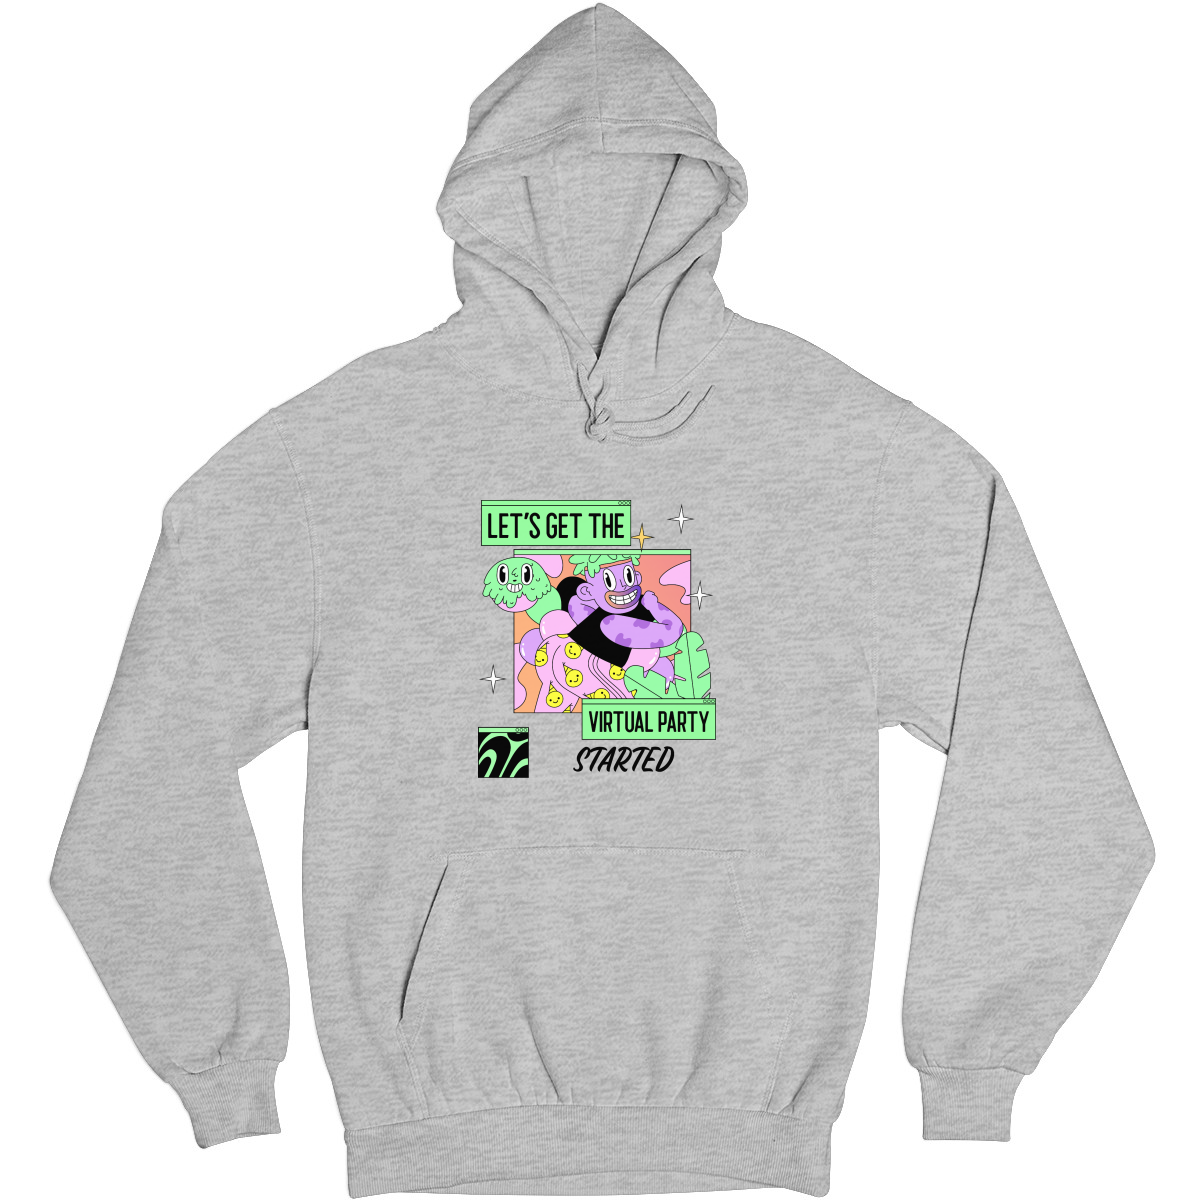 Let's get the virtual party started Unisex Hoodie | Gray